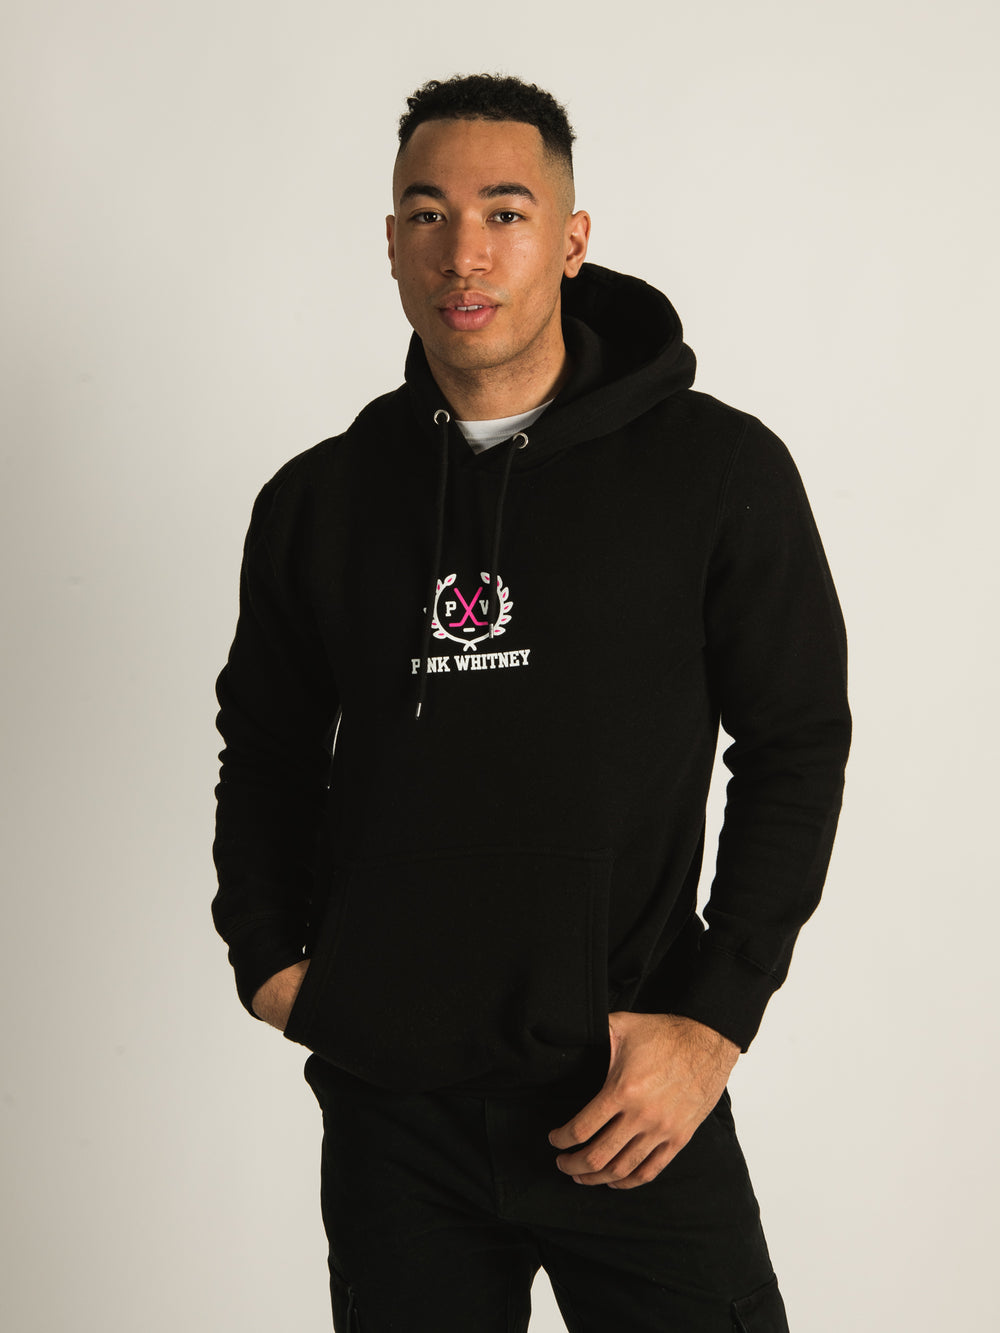 BARSTOOL SPORTS PINK WHITNEY CREST HOODIE